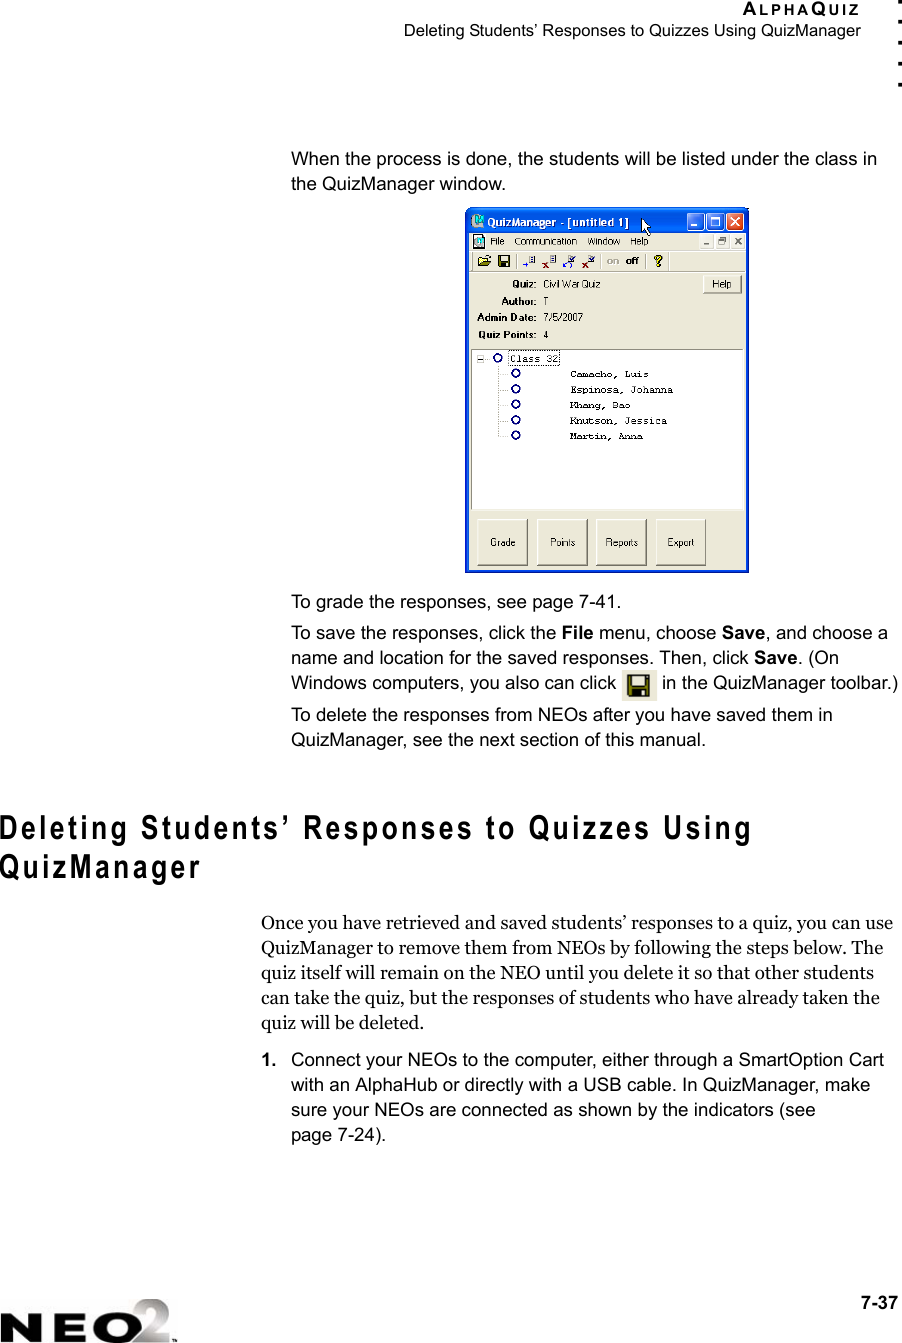 ALPHAQUIZDeleting Students’ Responses to Quizzes Using QuizManager7-37. . . . .When the process is done, the students will be listed under the class in the QuizManager window.To grade the responses, see page 7-41.To save the responses, click the File menu, choose Save, and choose a name and location for the saved responses. Then, click Save. (On Windows computers, you also can click   in the QuizManager toolbar.)To delete the responses from NEOs after you have saved them in QuizManager, see the next section of this manual.Deleting Students’ Responses to Quizzes Using QuizManagerOnce you have retrieved and saved students’ responses to a quiz, you can use QuizManager to remove them from NEOs by following the steps below. The quiz itself will remain on the NEO until you delete it so that other students can take the quiz, but the responses of students who have already taken the quiz will be deleted.1. Connect your NEOs to the computer, either through a SmartOption Cart with an AlphaHub or directly with a USB cable. In QuizManager, make sure your NEOs are connected as shown by the indicators (seepage 7-24).